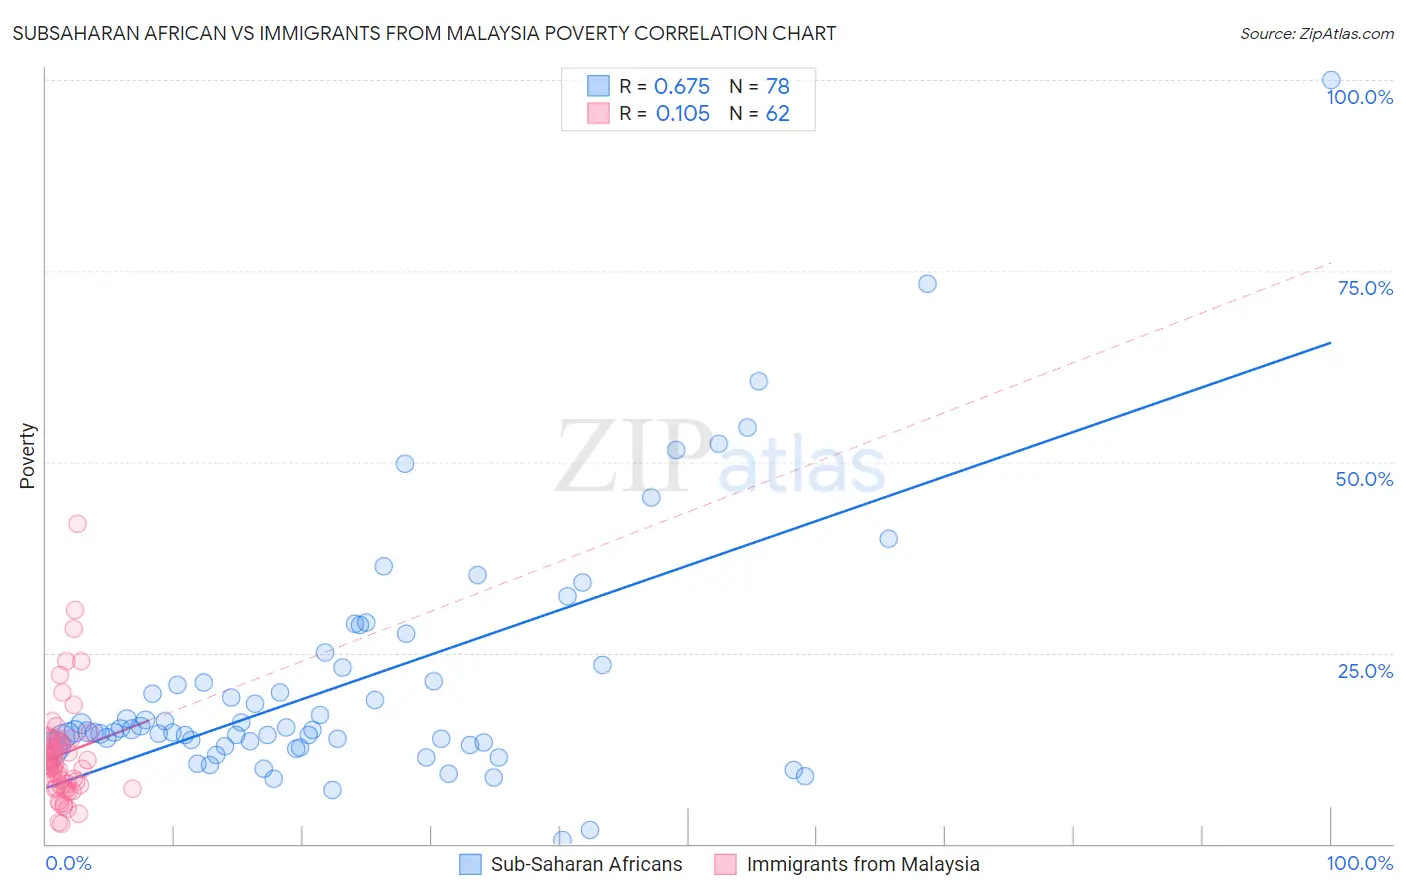 Subsaharan African vs Immigrants from Malaysia Poverty